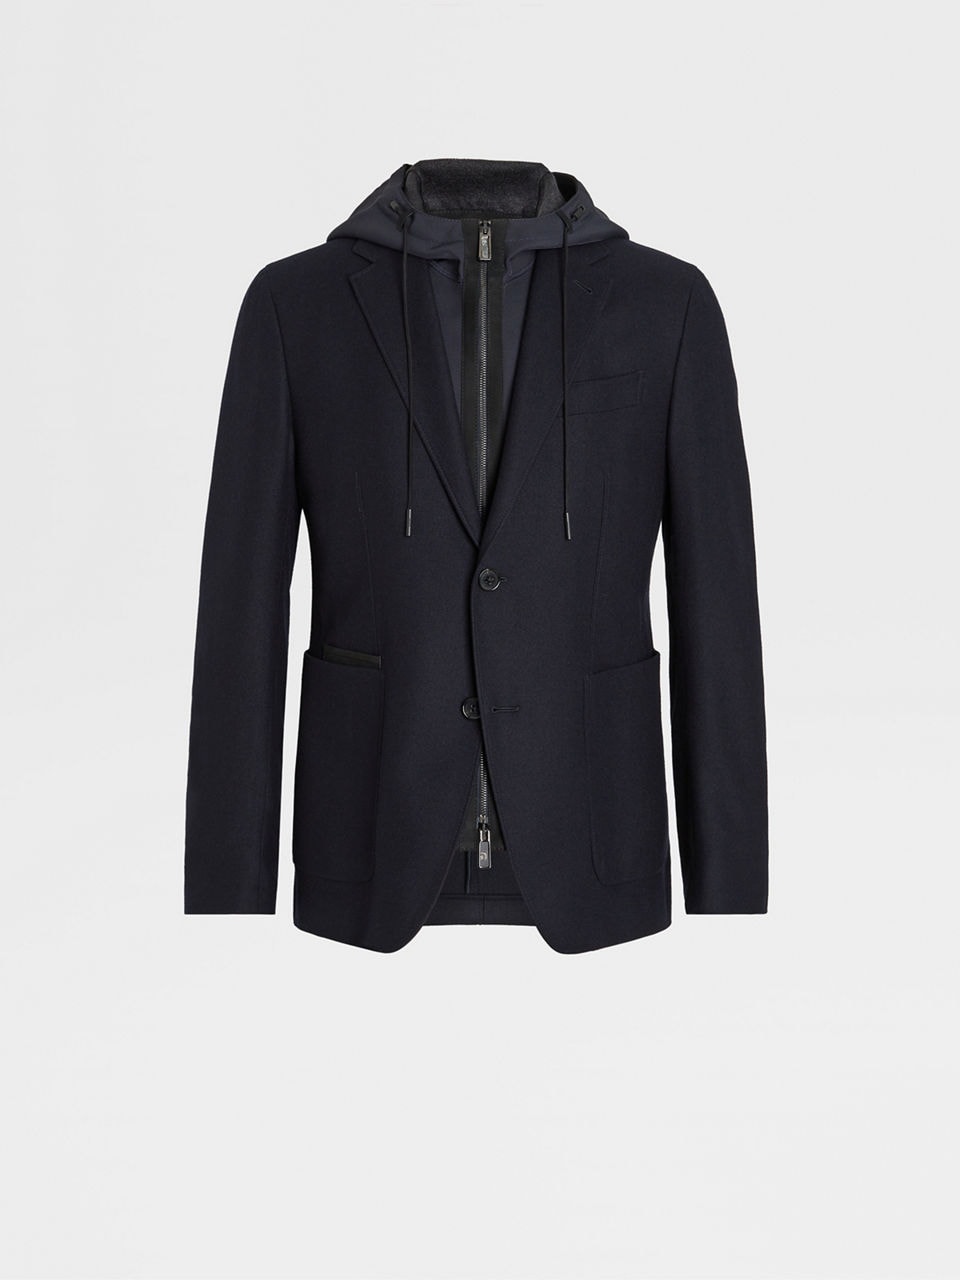 Zegna Trofeo™ wool single-breasted suit - Blue